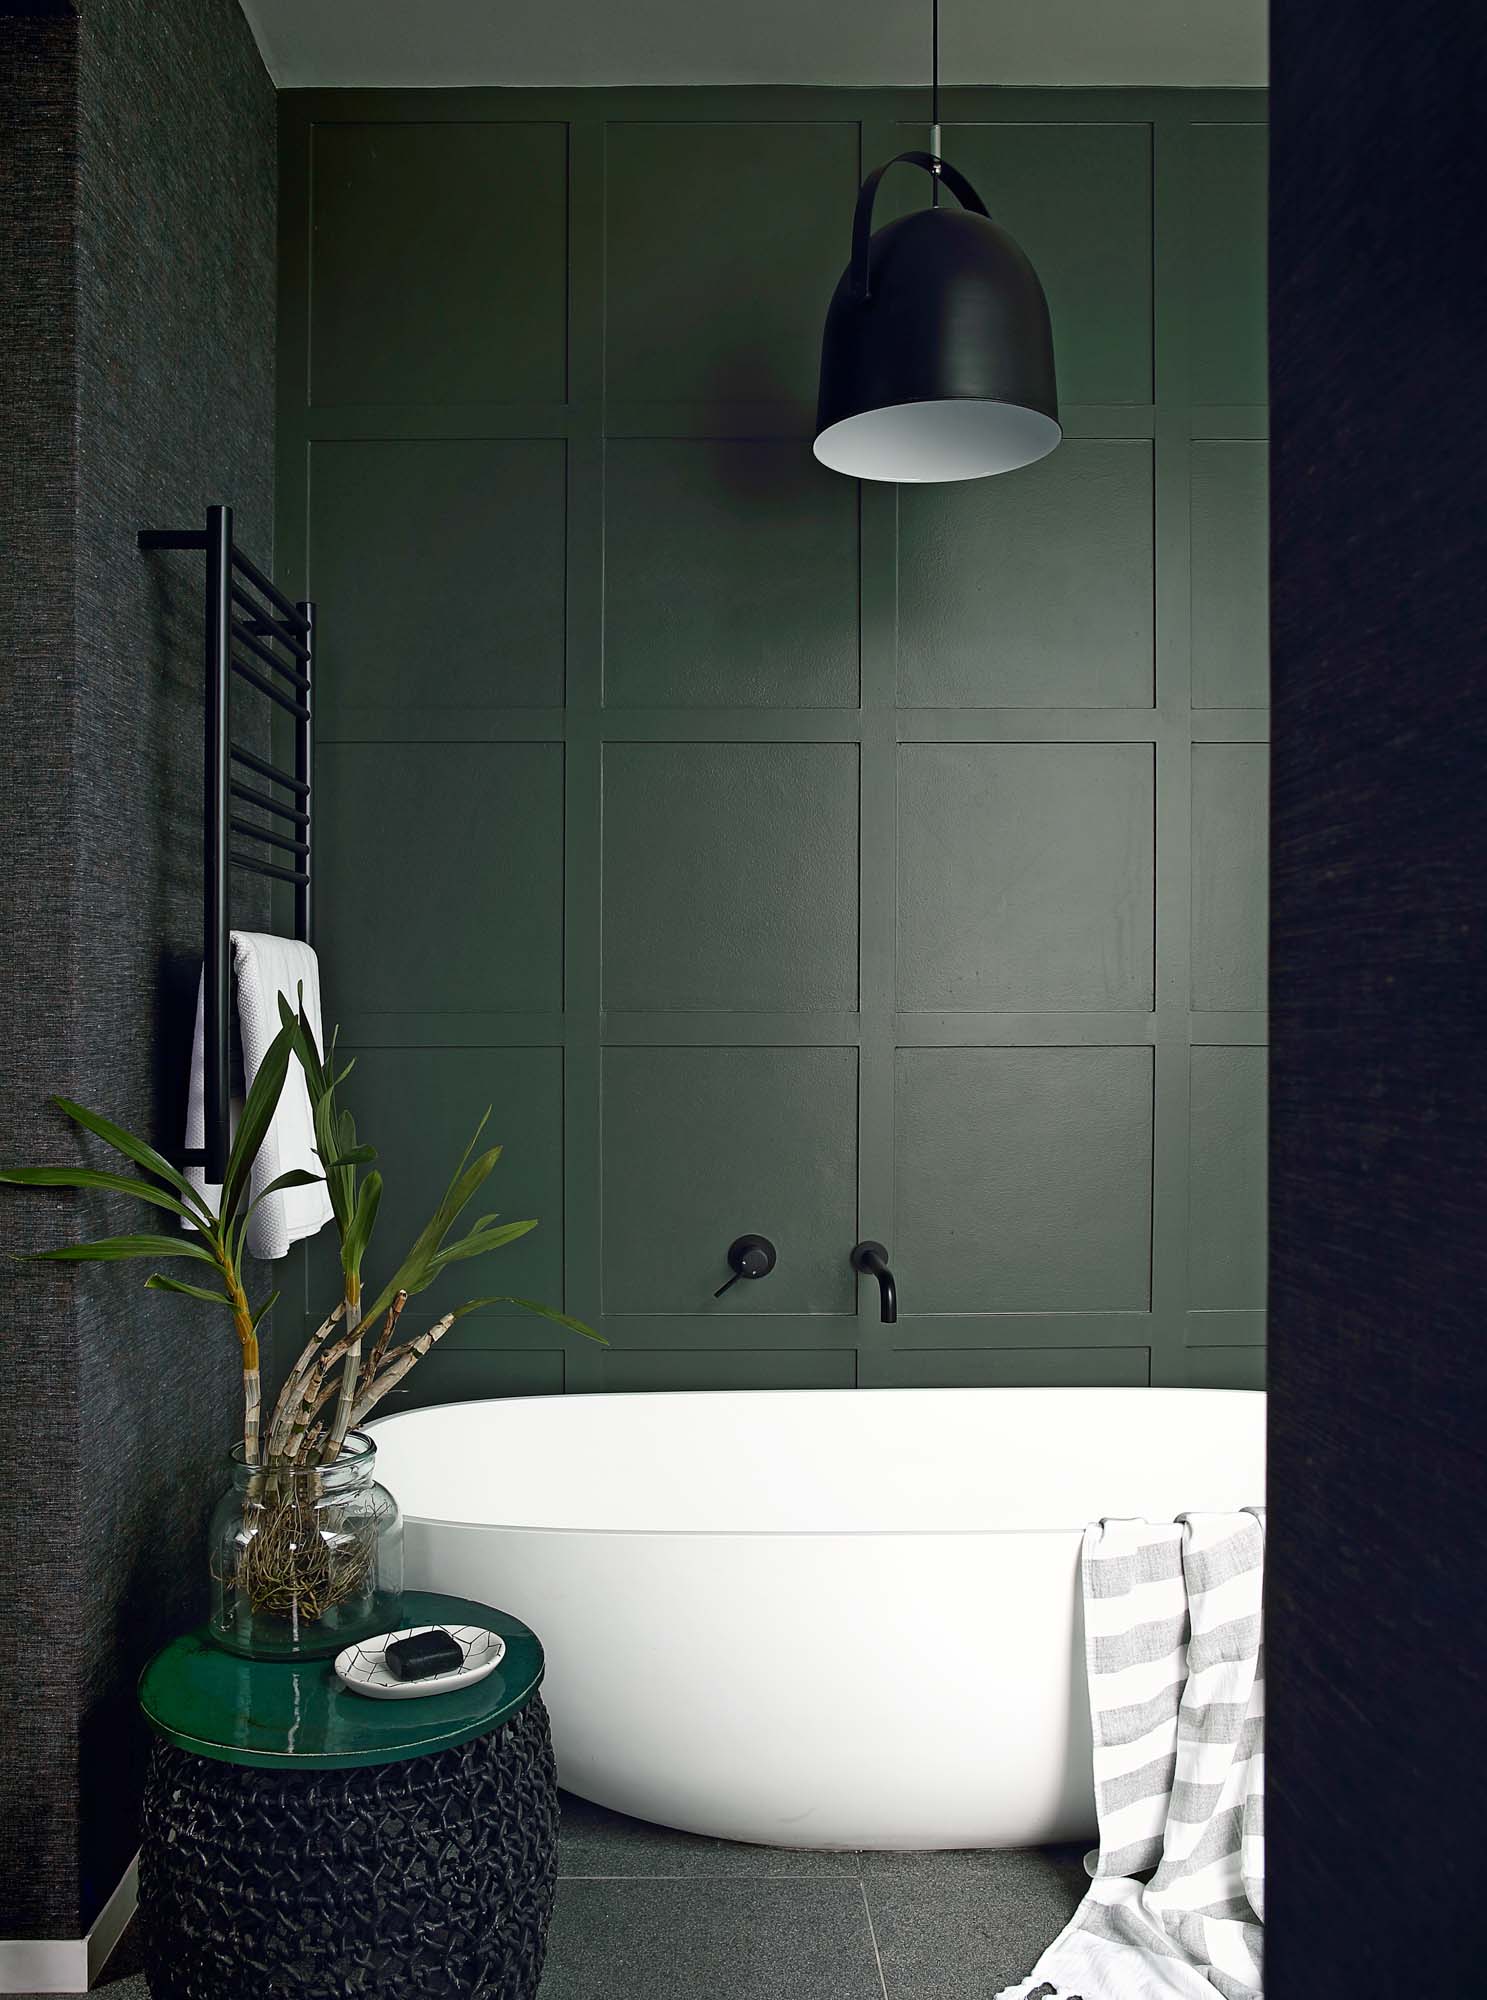 A green bathroom with forest green painted walls and dark tiles and a white freestanding bath